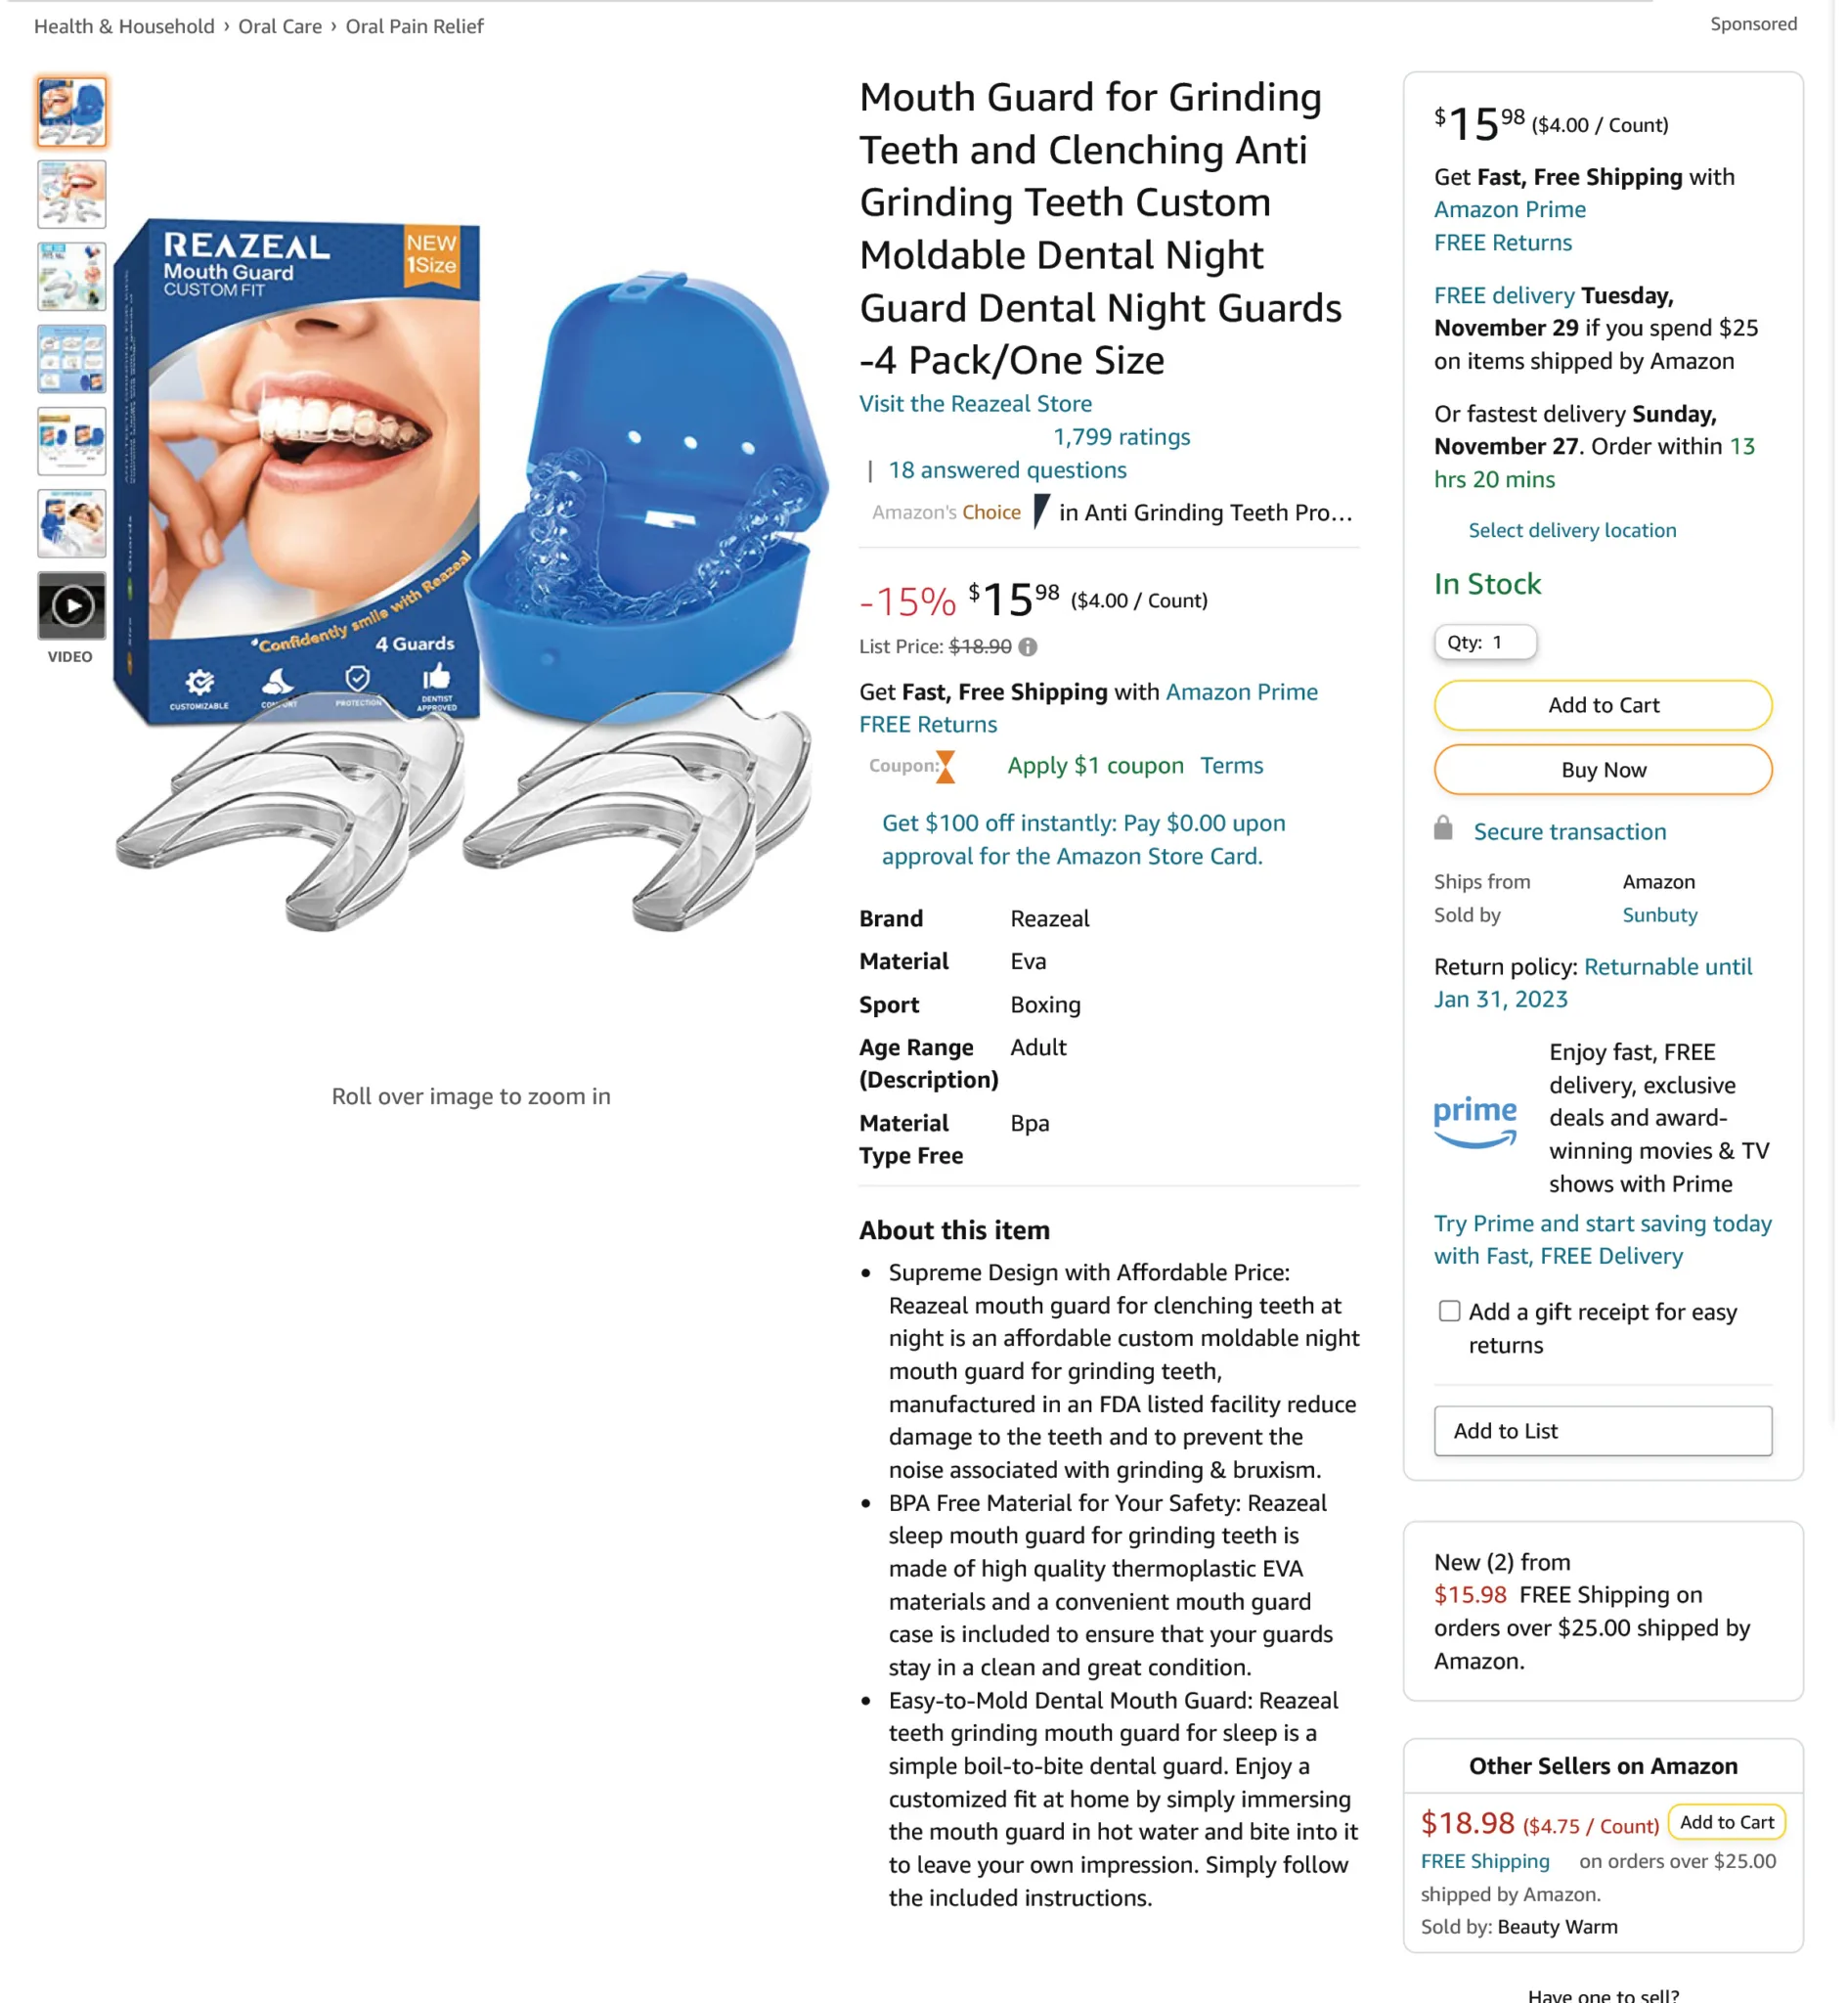 mouth guards from Amazon - Soliciting 5-star reviews